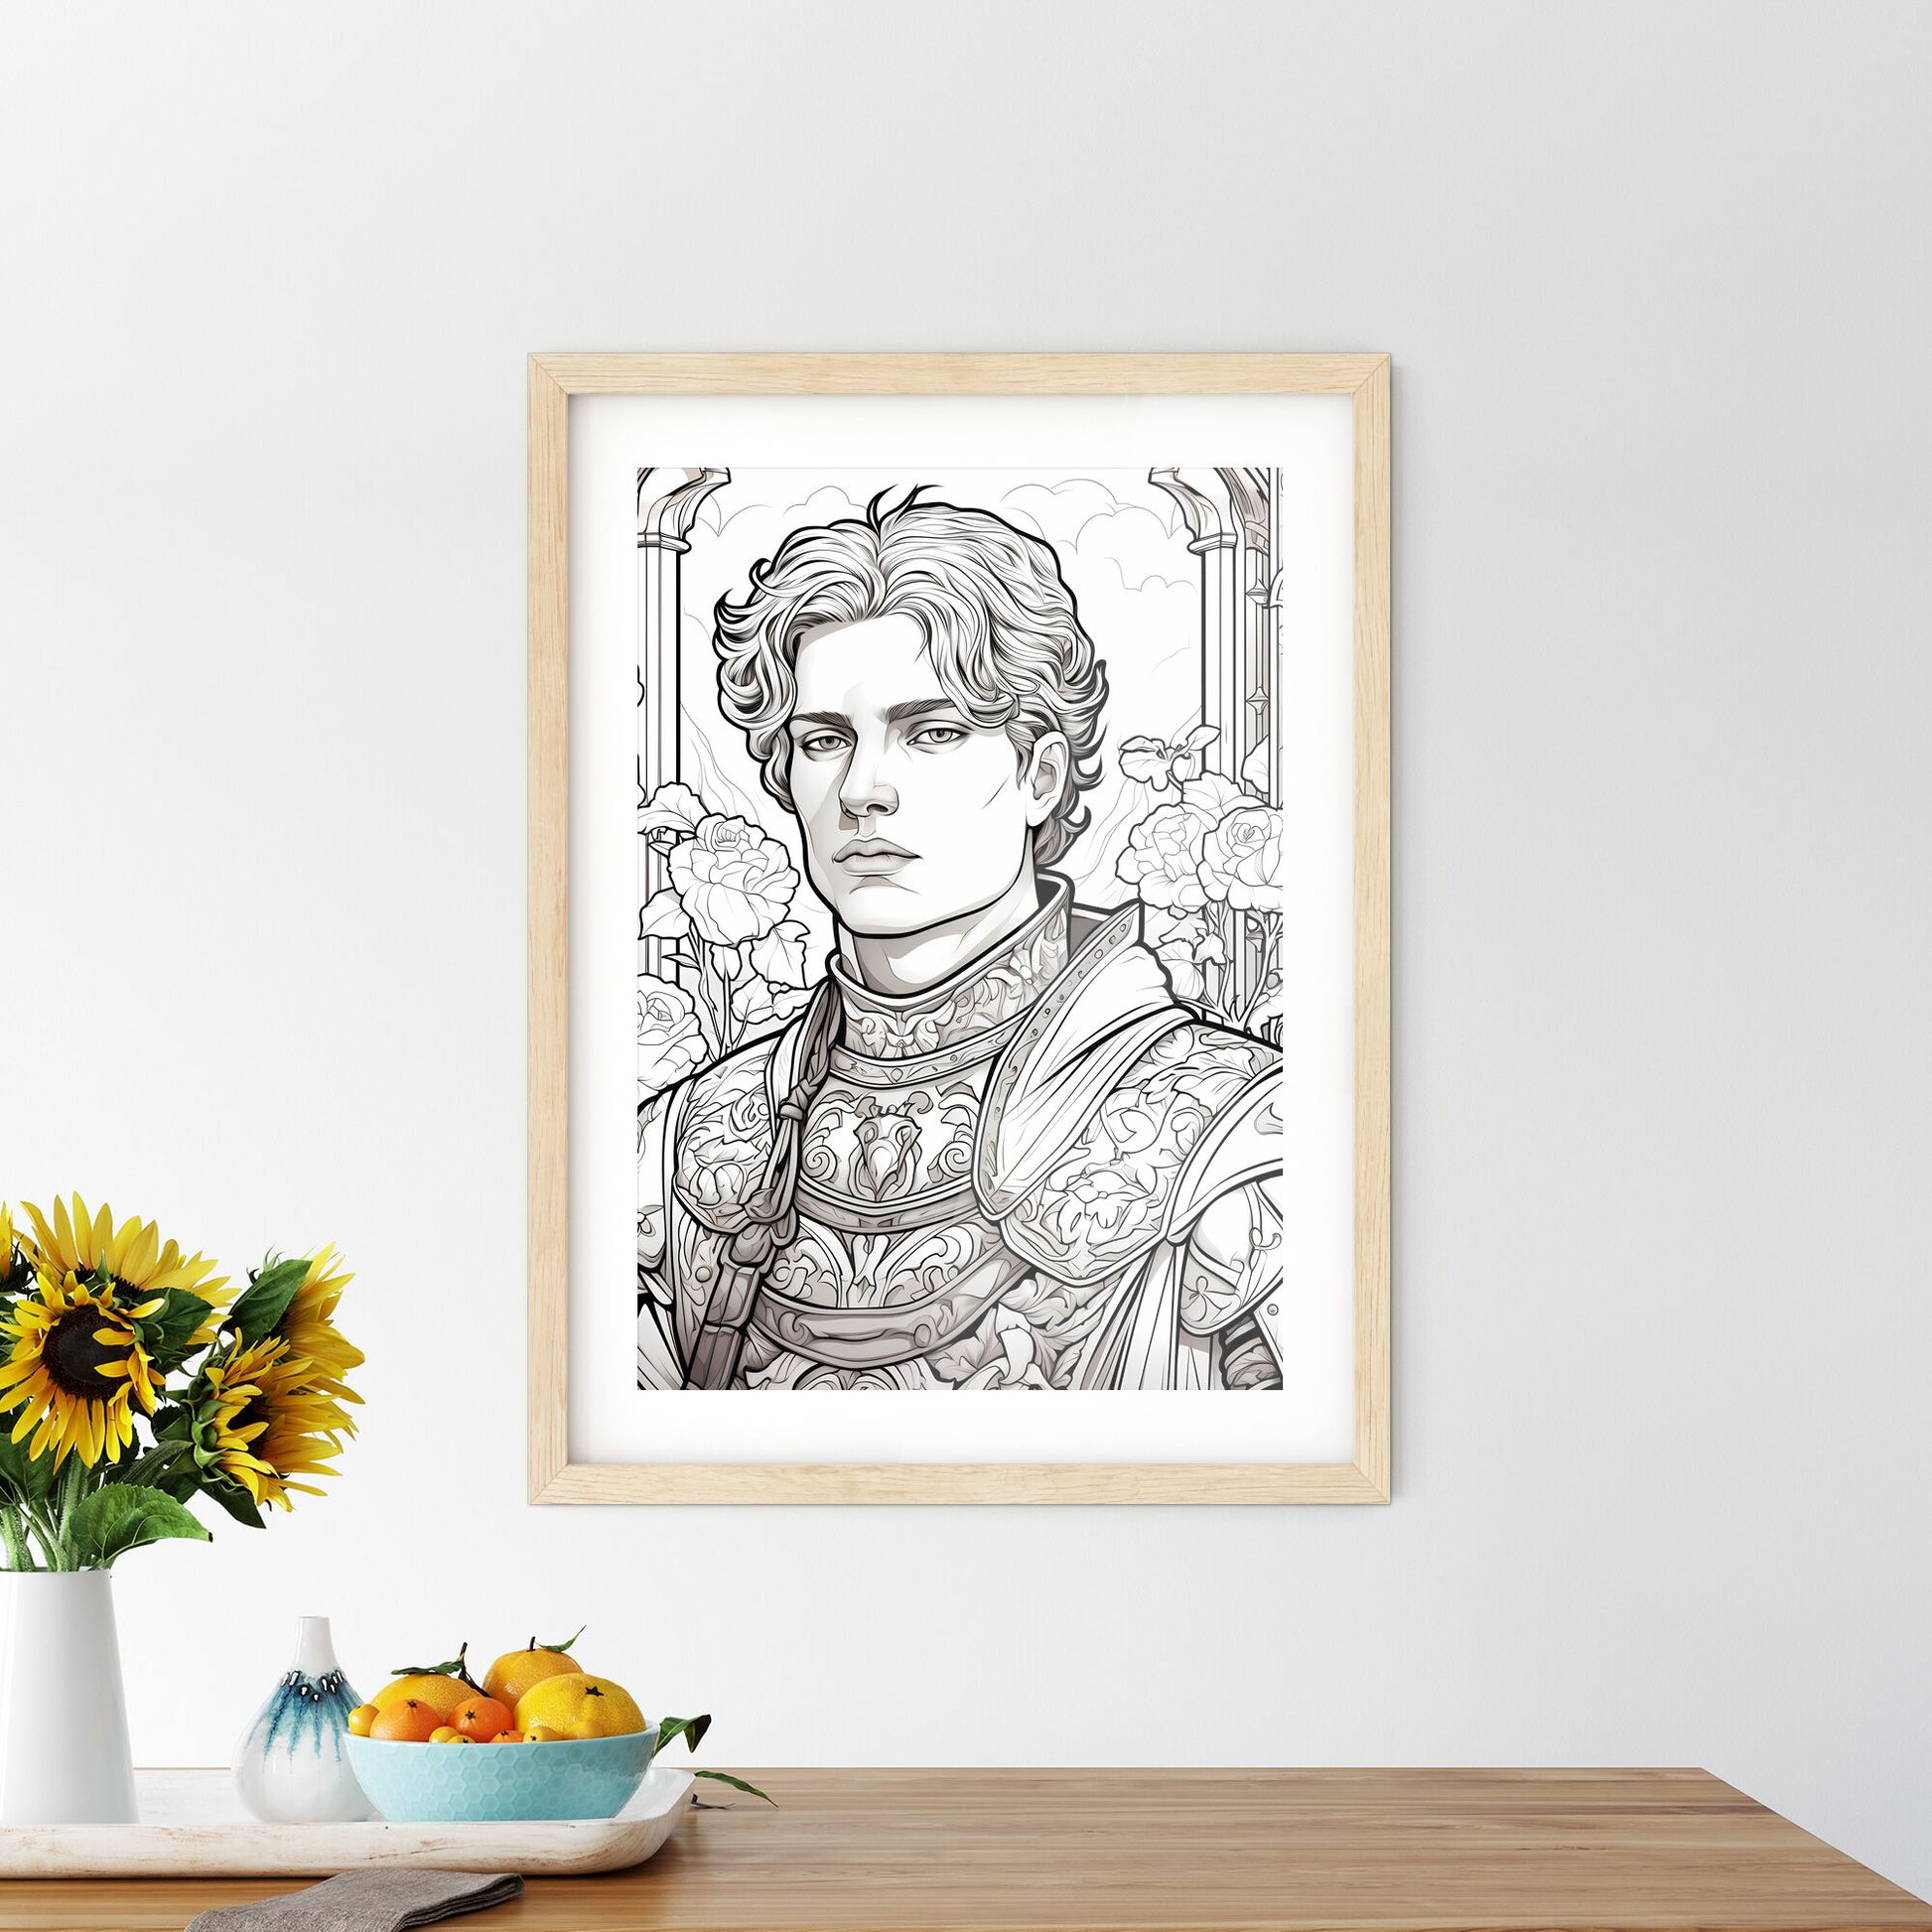 Coloring Book - A Man In Armor With Flowers Default Title